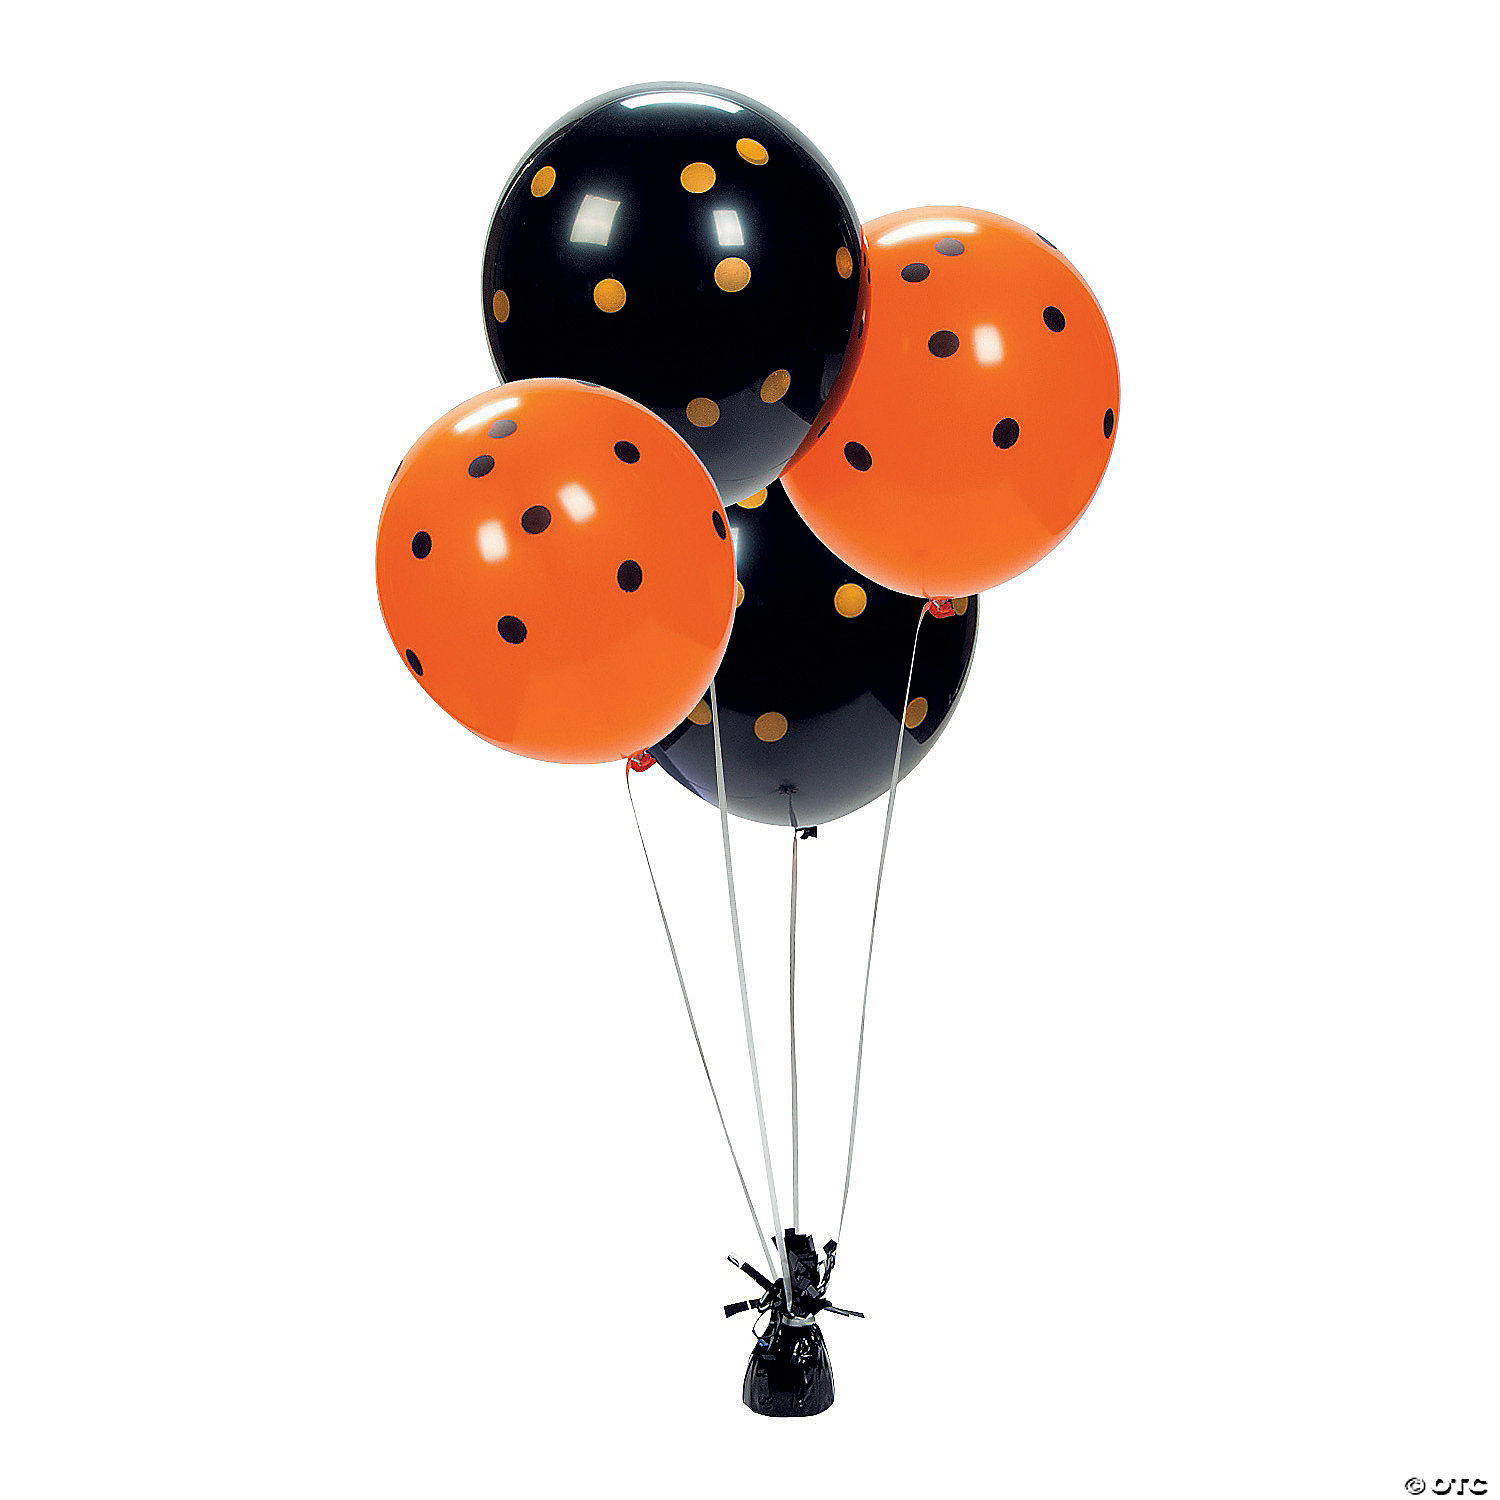 HALLOWEEN 15 ORANGE AND BLACK BALLOONS SPOOKY PARTY DECORATIONS